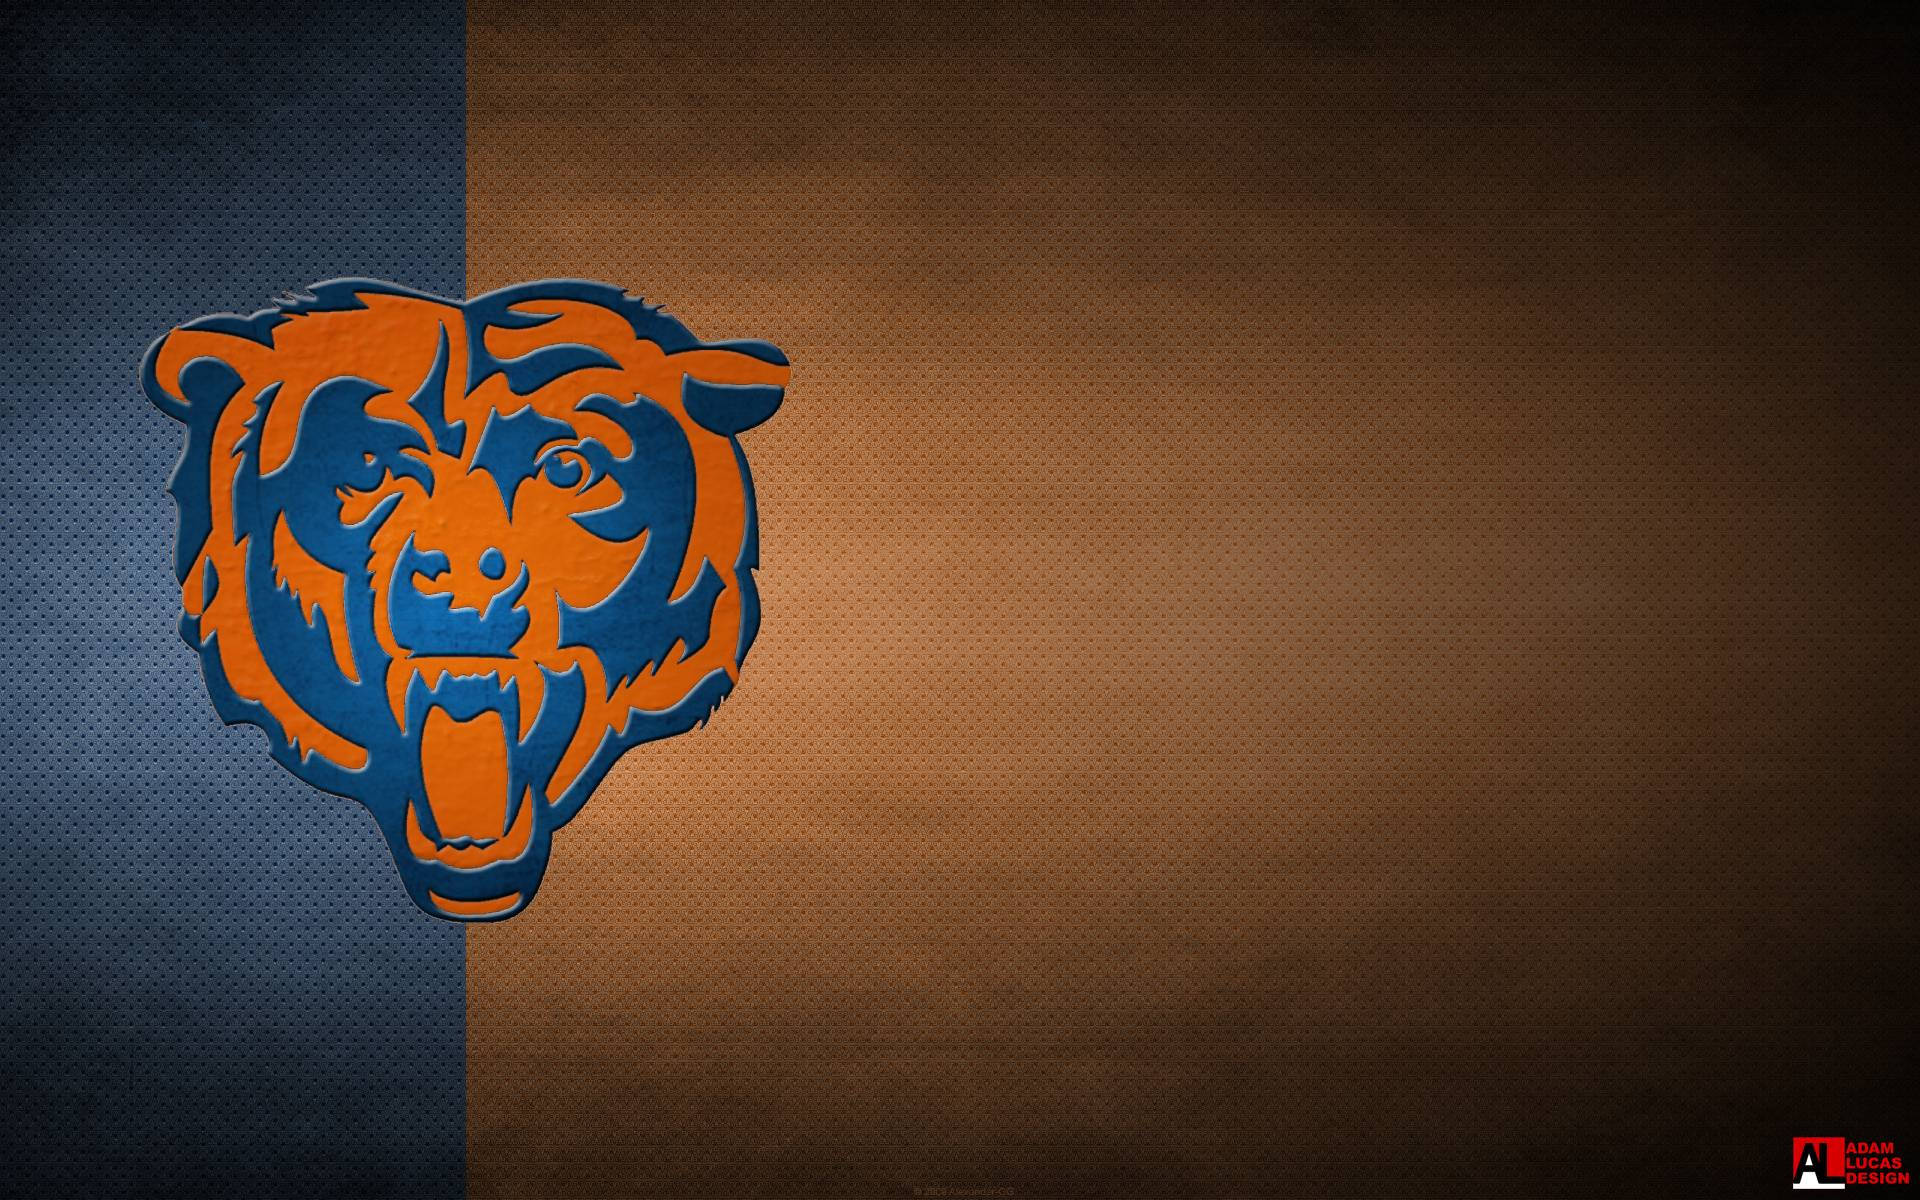 Chicago Bears and Their Loyal Fans Wallpaper